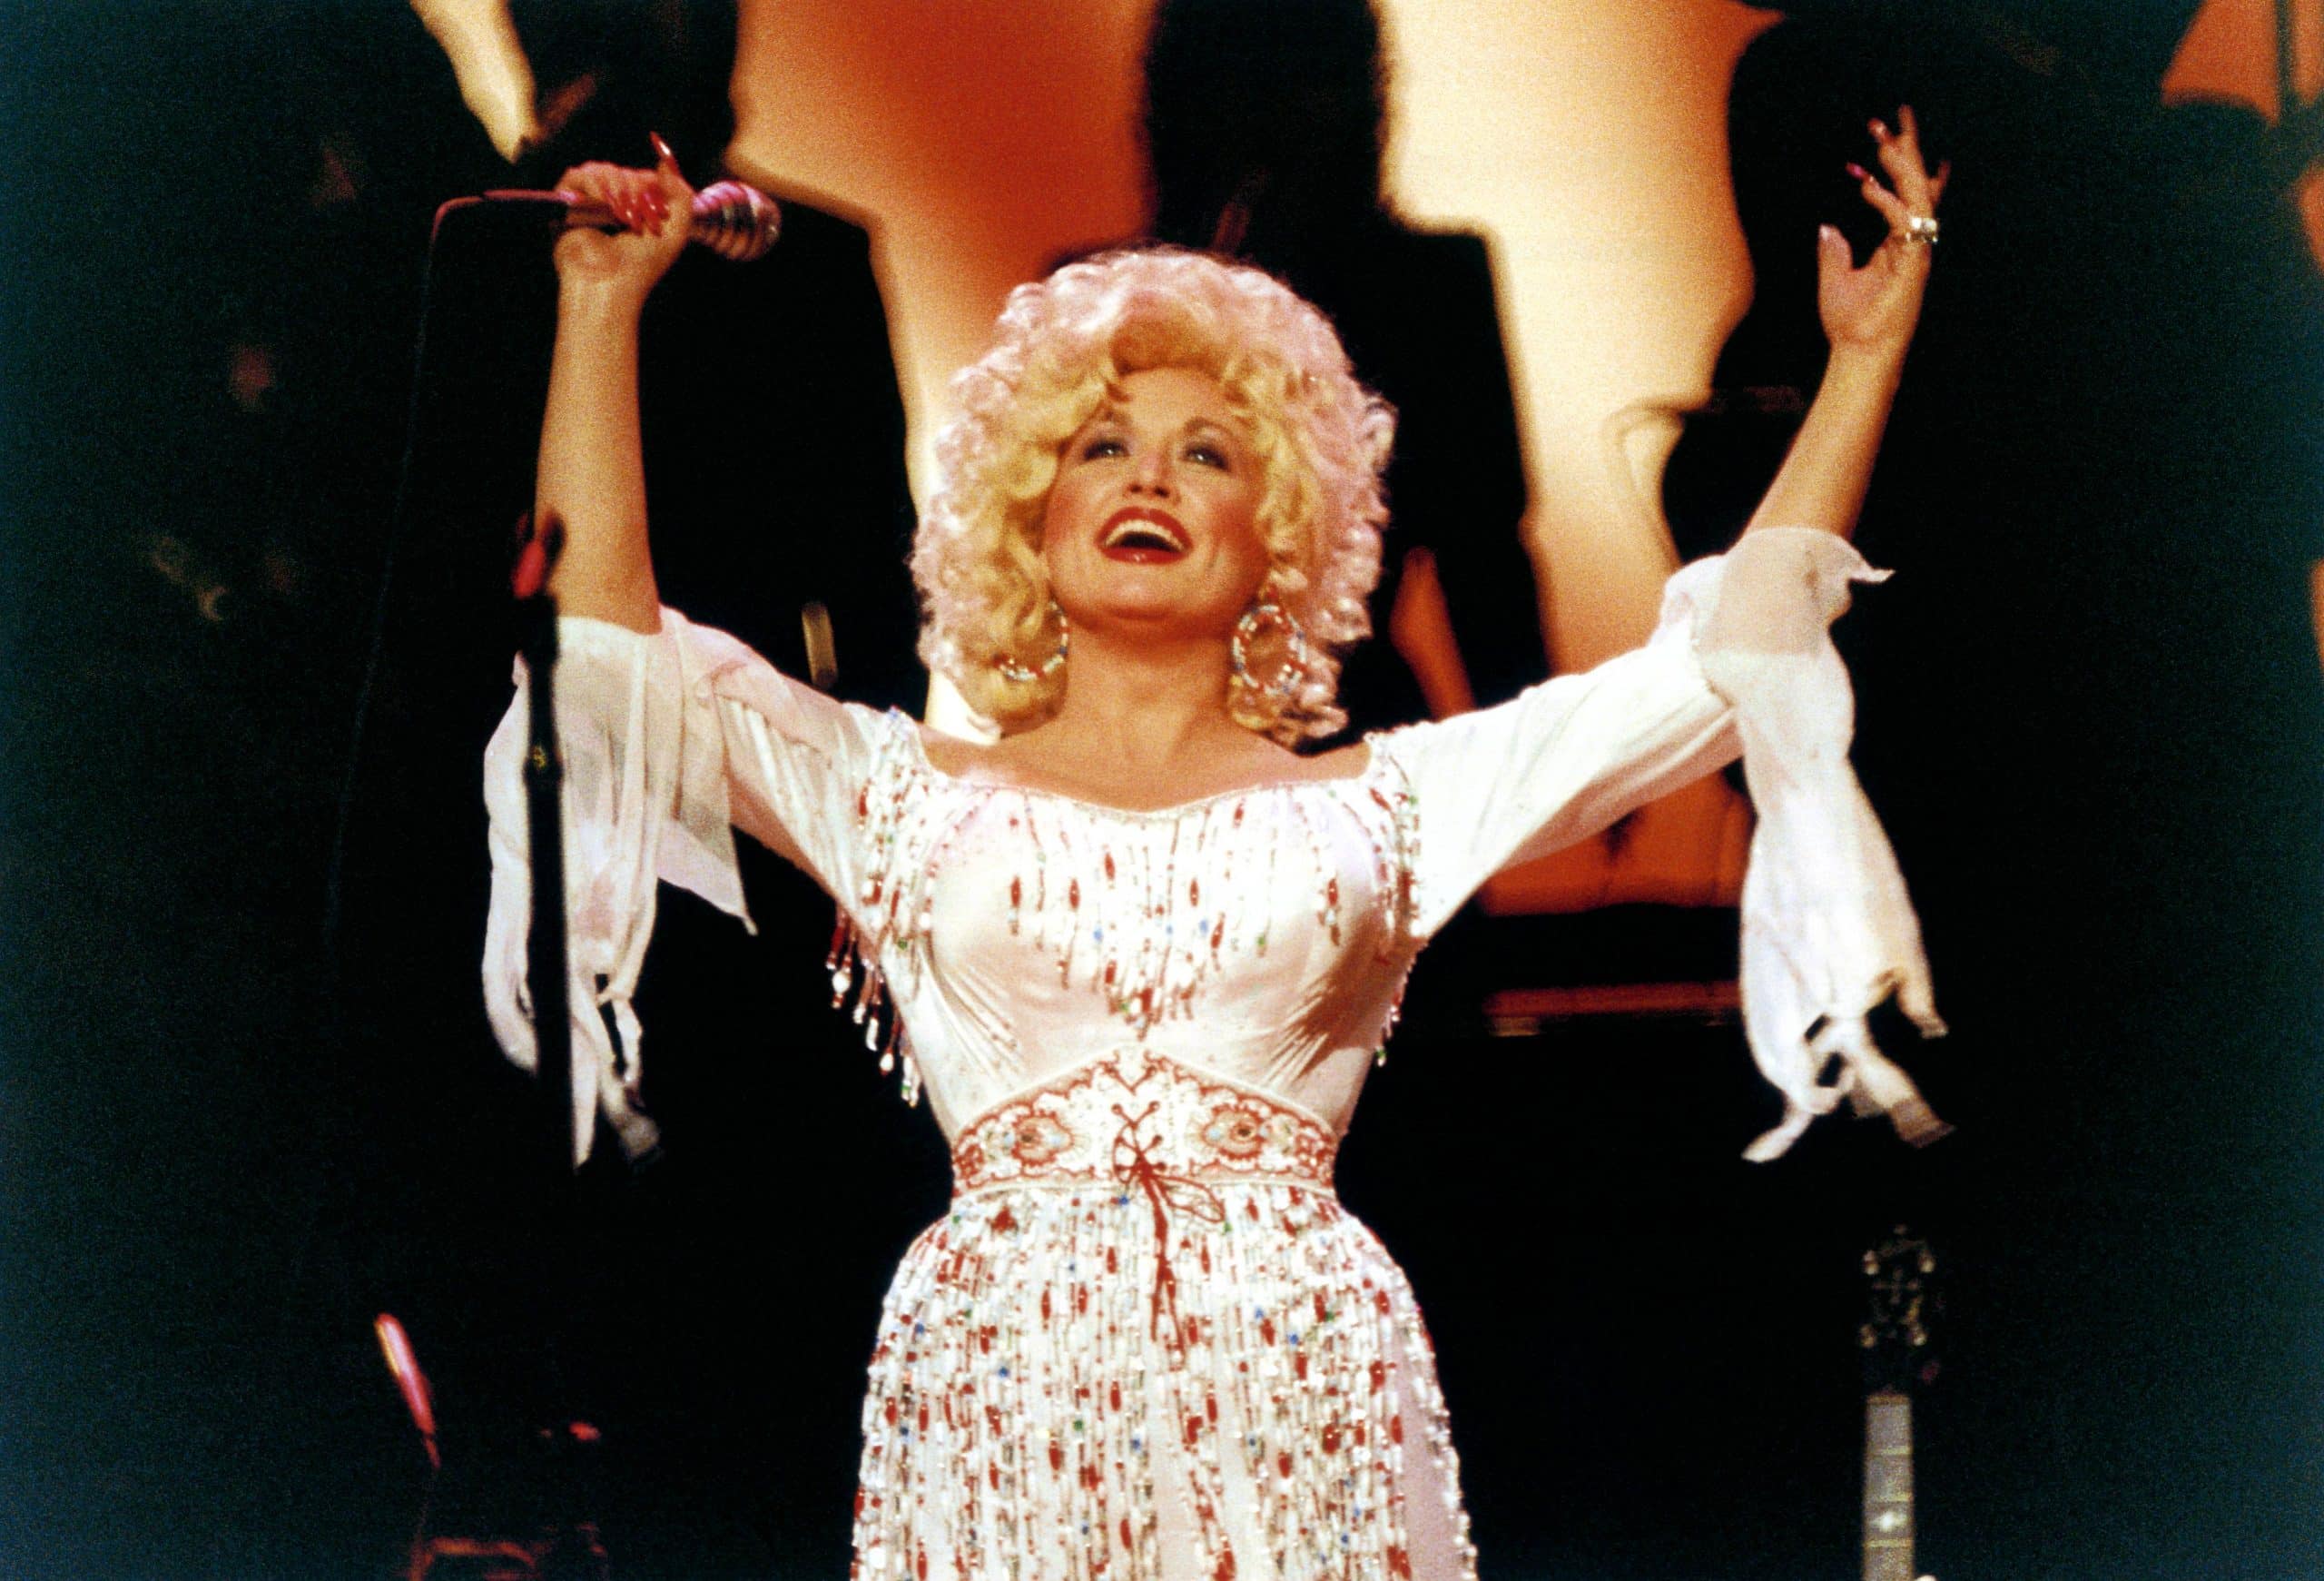 Country Singers With Gospel Albums - Dolly Parton has released many gospel projects throughout her decades-long career